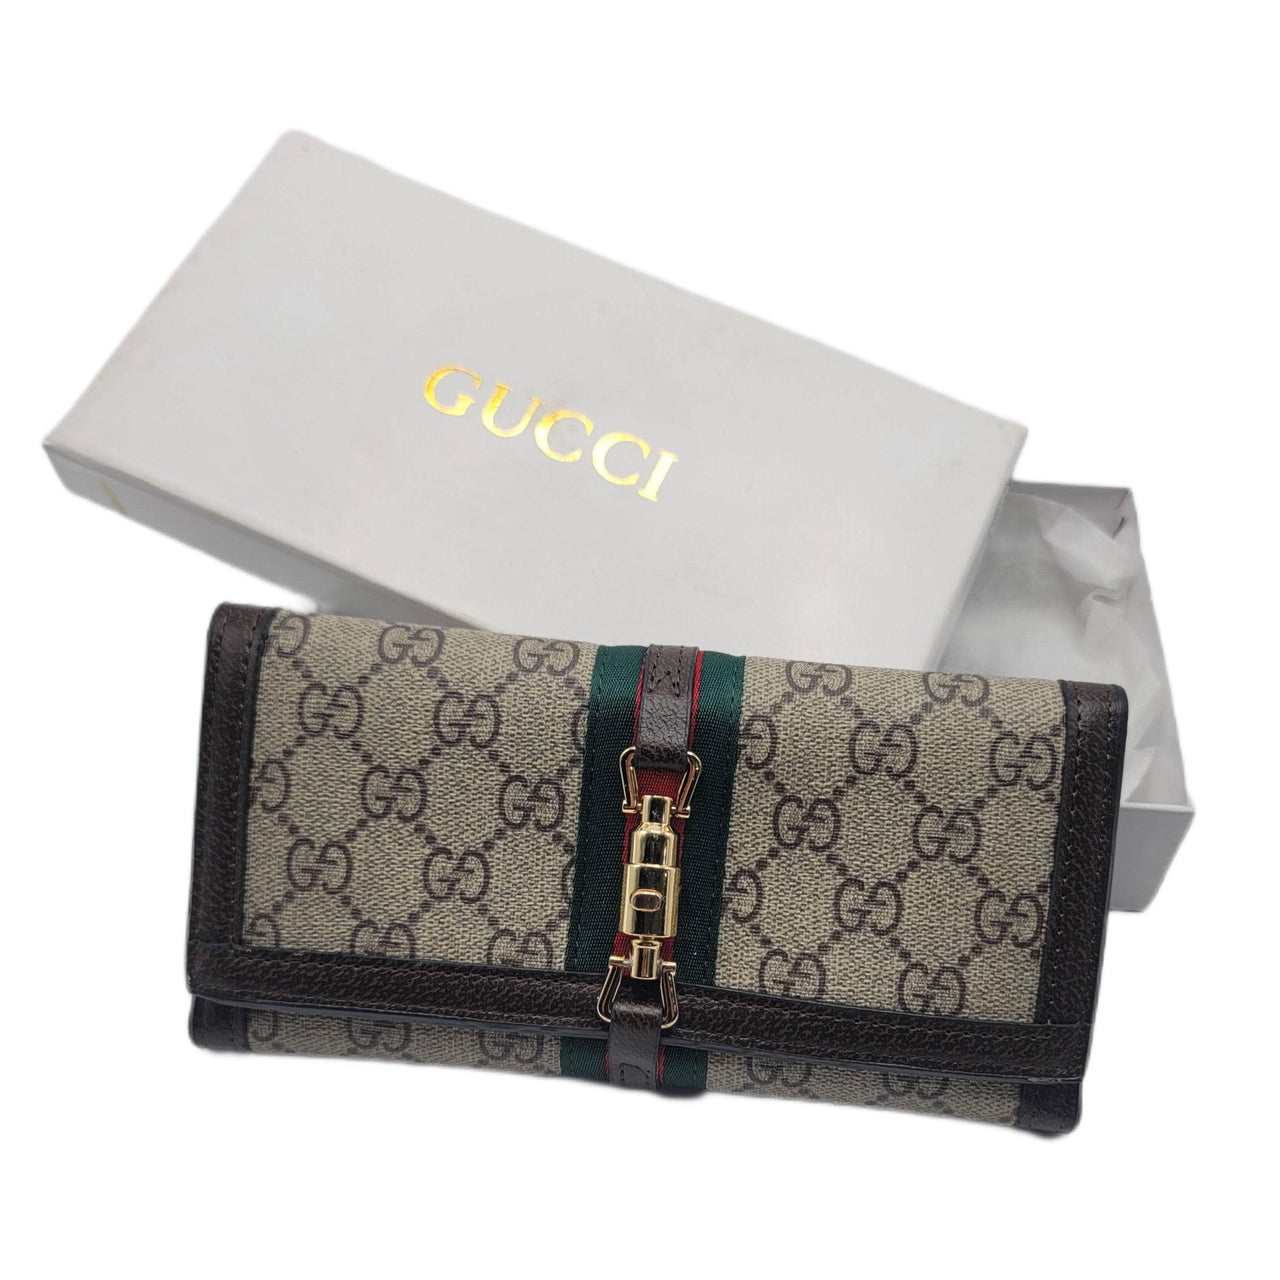 The Bag Couture Luggage & Bags Gucci 3 Fold Wallet BL